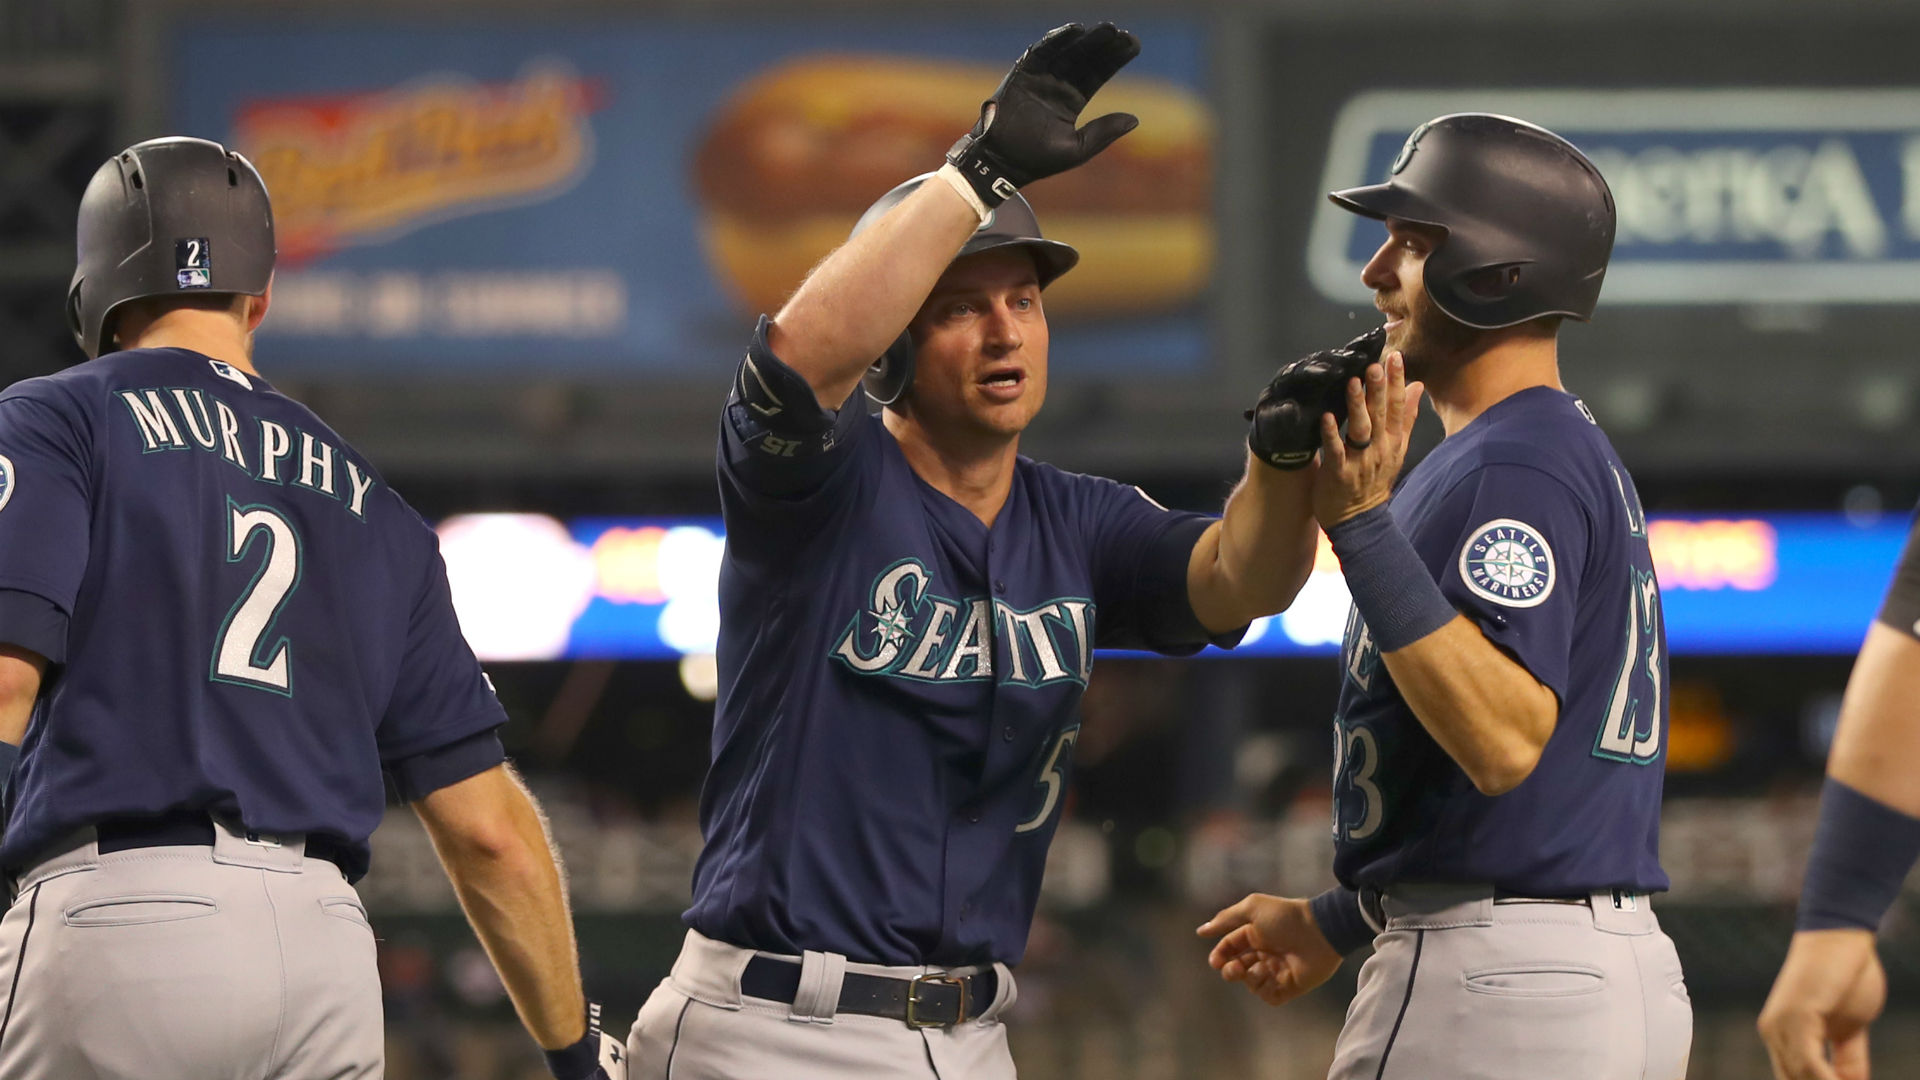 Seager became the 11th Mariner in team history with three home runs in a single game.